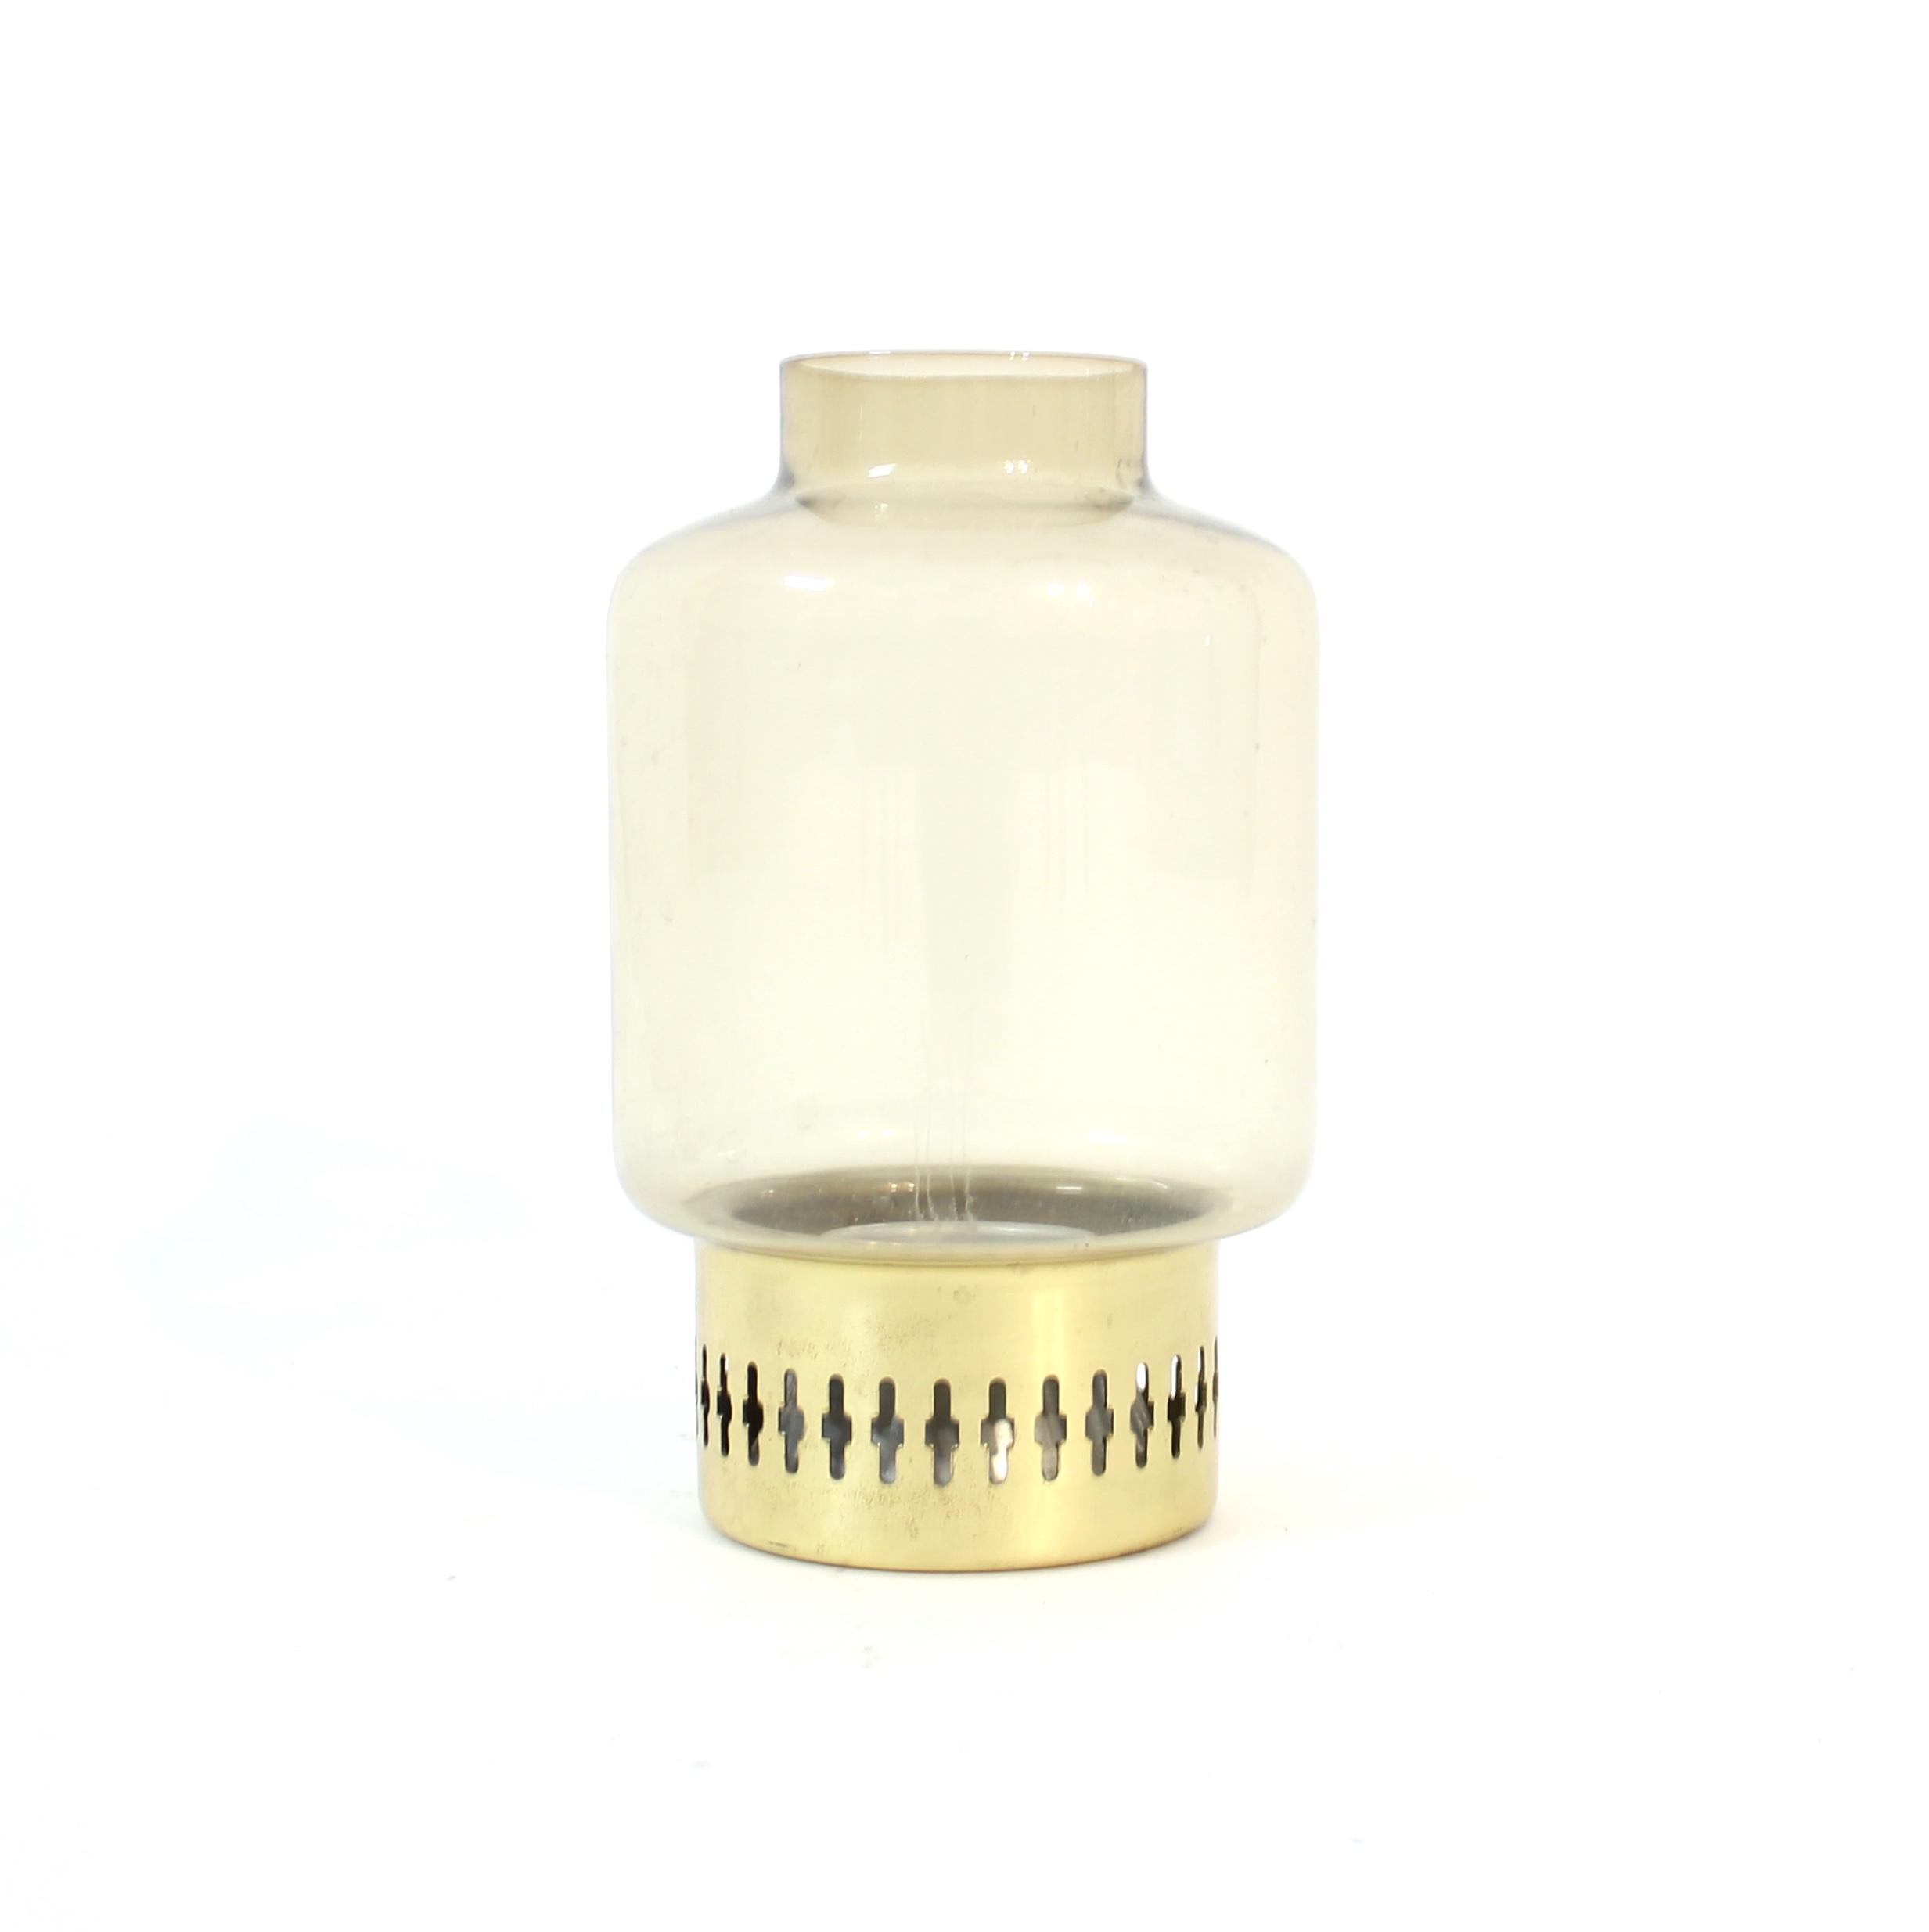 Candle holder, model L 95, designed by Hans-Agne Jakobsson for his own company  Hans-Agne Jakobsson AB, Markaryd, in the 1960s. It contains a smoke coloured glass bulb on a brass base. Very good vintage condition with light ware consistent with age